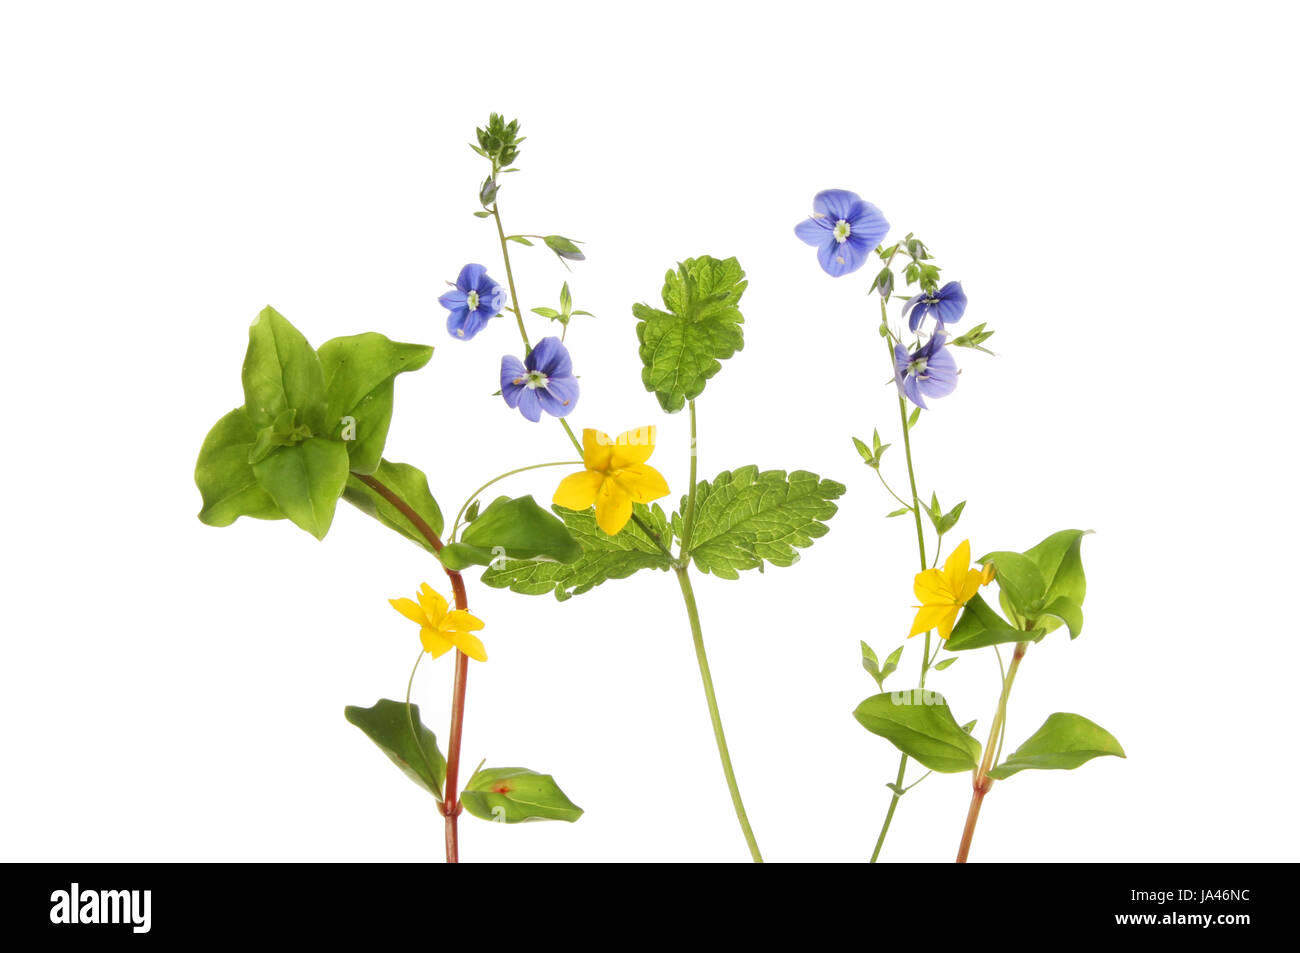 Creeping-jenny and Speedwell wild flowers and foliage isolated against white Stock Photo